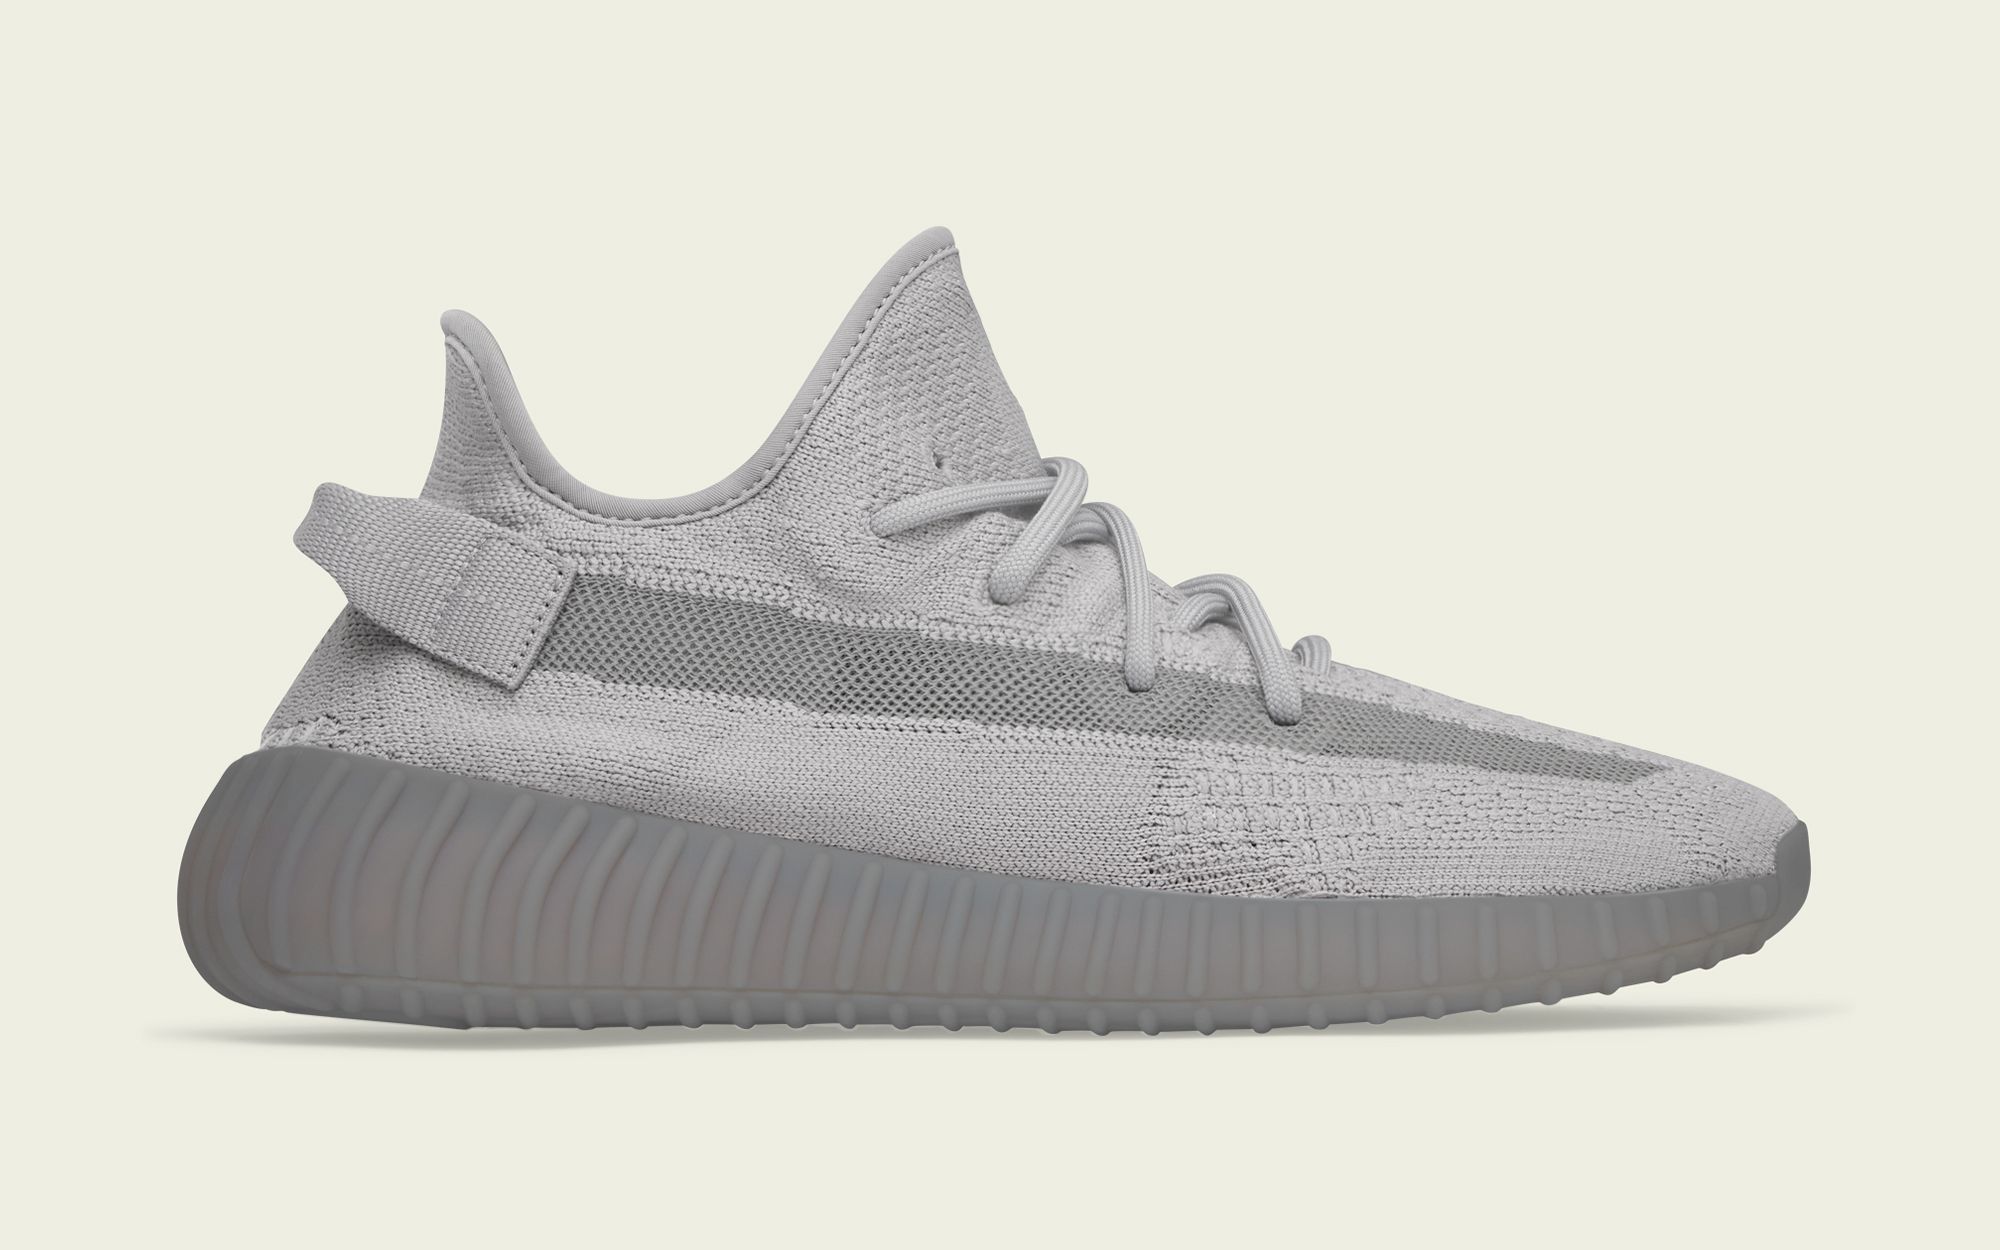 Where to Buy the Yeezy 350 v2 Steel Grey | House of Heat°